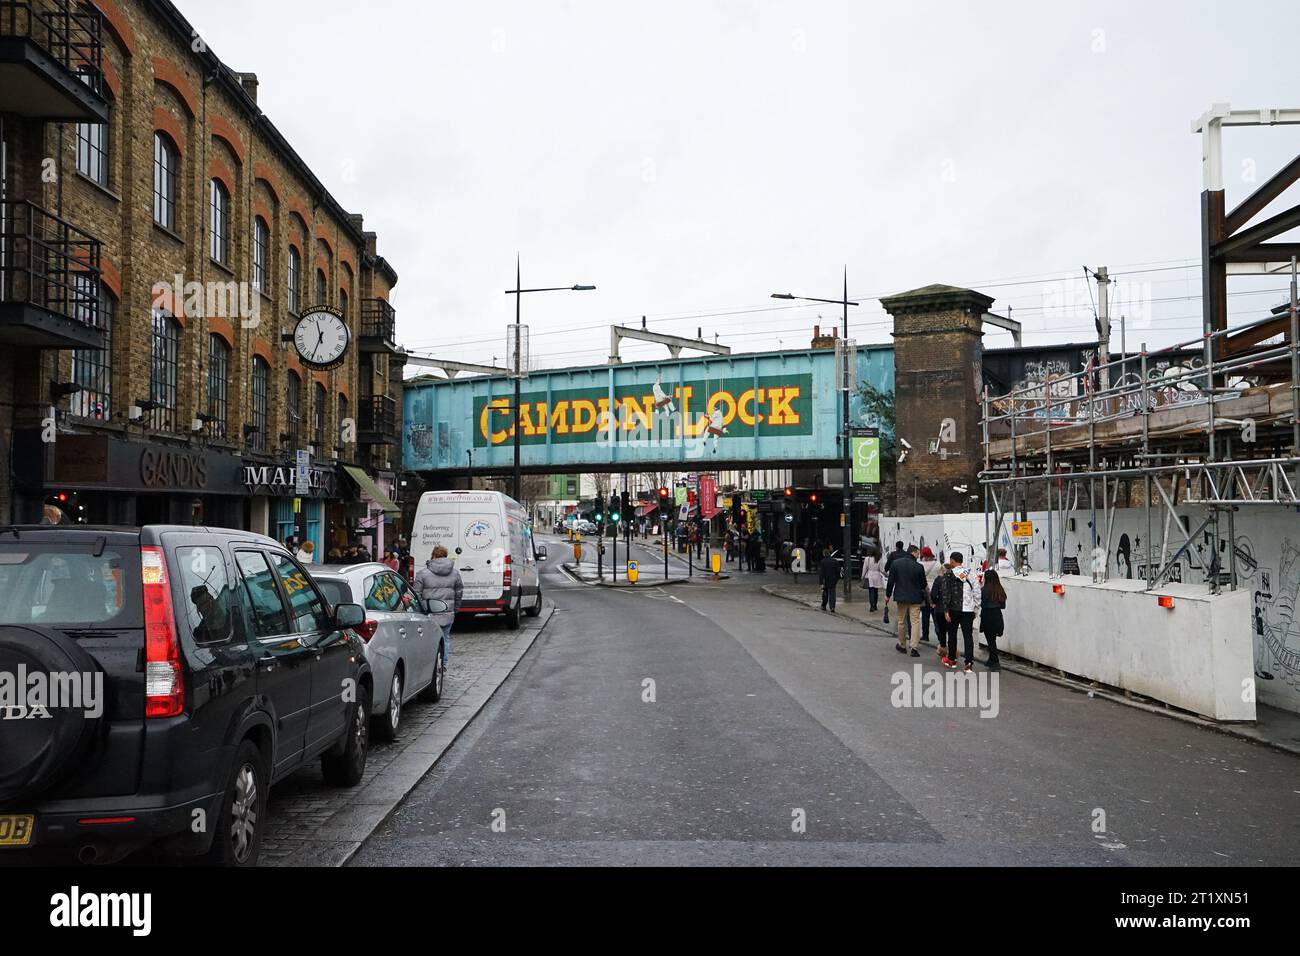 Exterior design and decoration of Camden market (Buck street market), thousands of famous stalls selling fashion, music, art and food stores in London Stock Photo